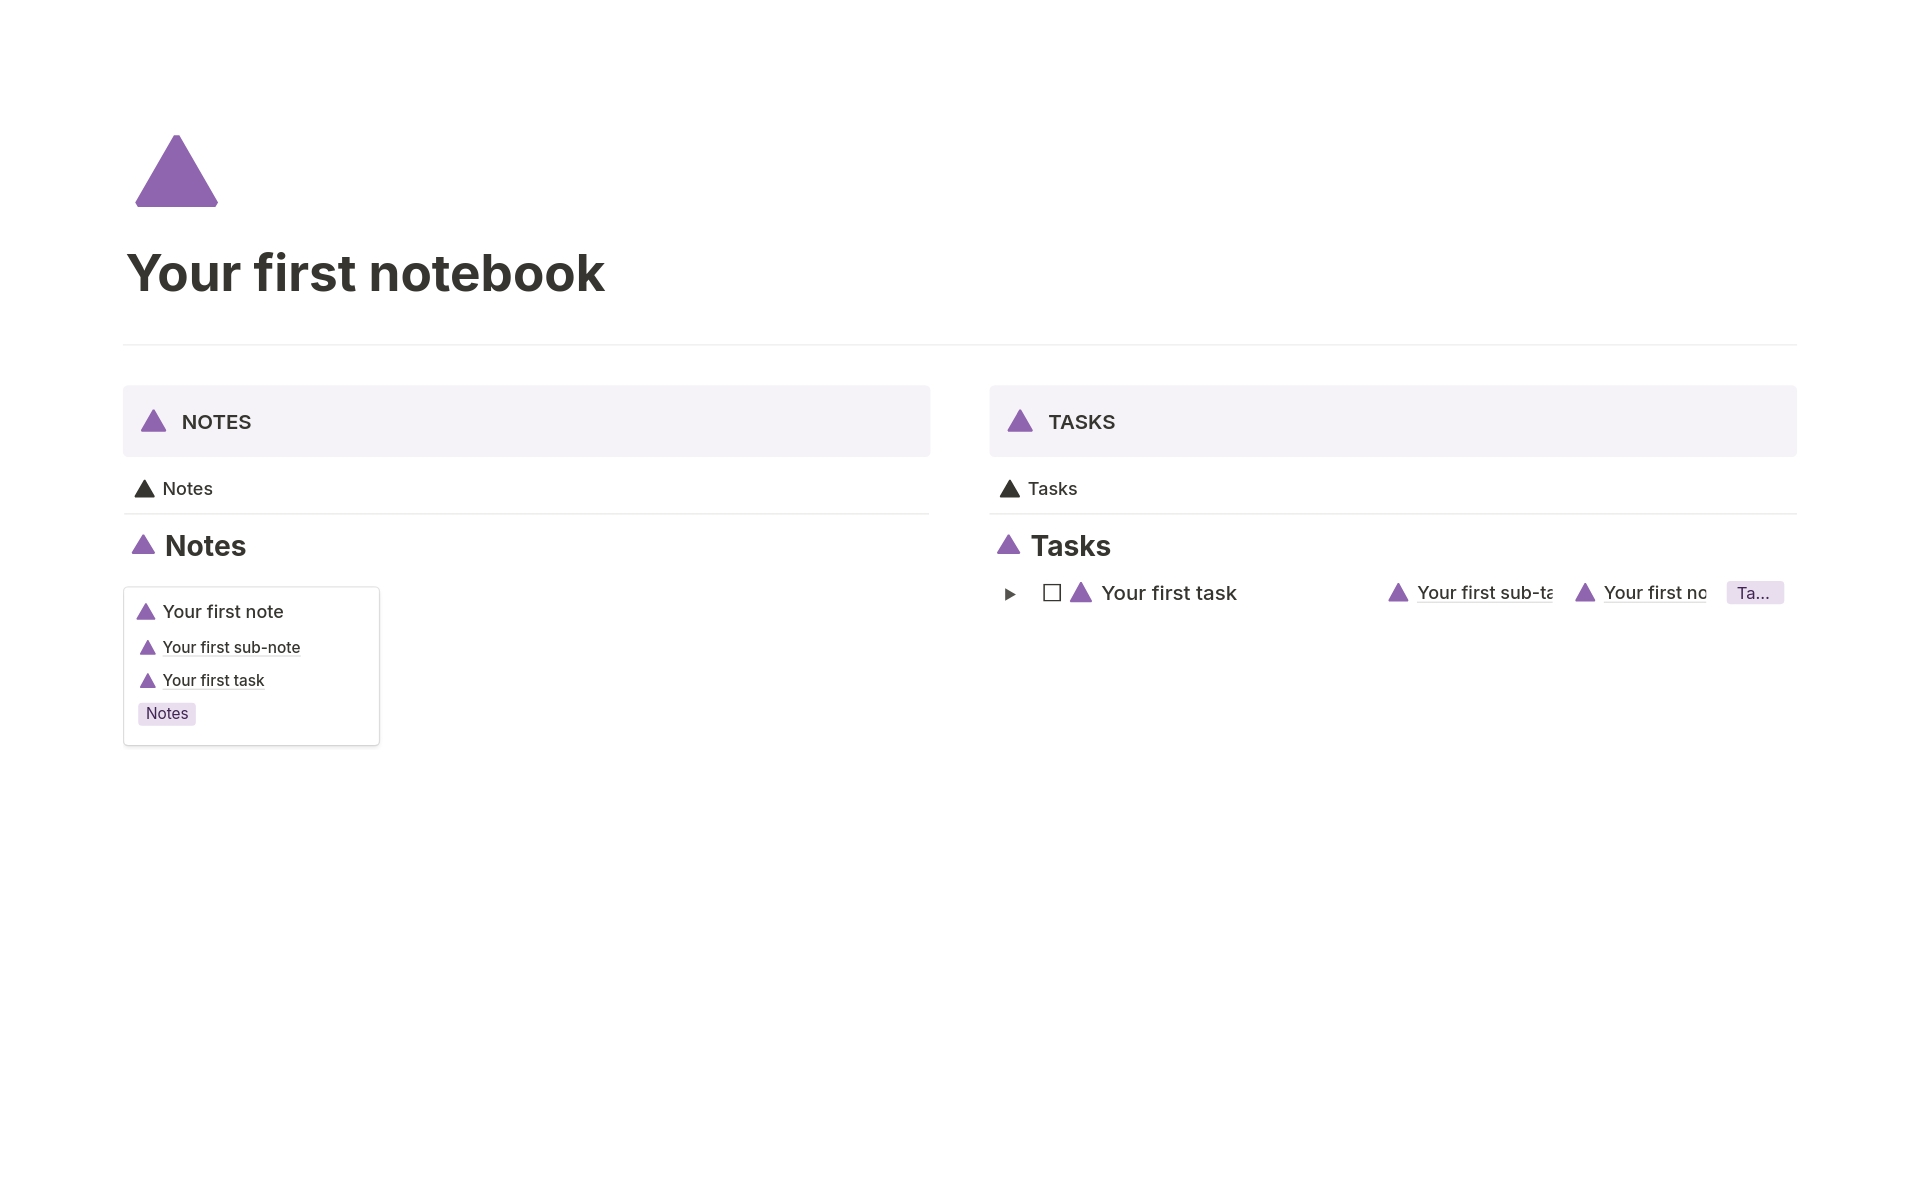 Boost your productivity with this versatile Notion template! Create and manage multiple notebooks, each housing notes and tasks. Notes can include sub-notes and tasks, while tasks can have sub-tasks and additional notes. Perfect for professionals and students.